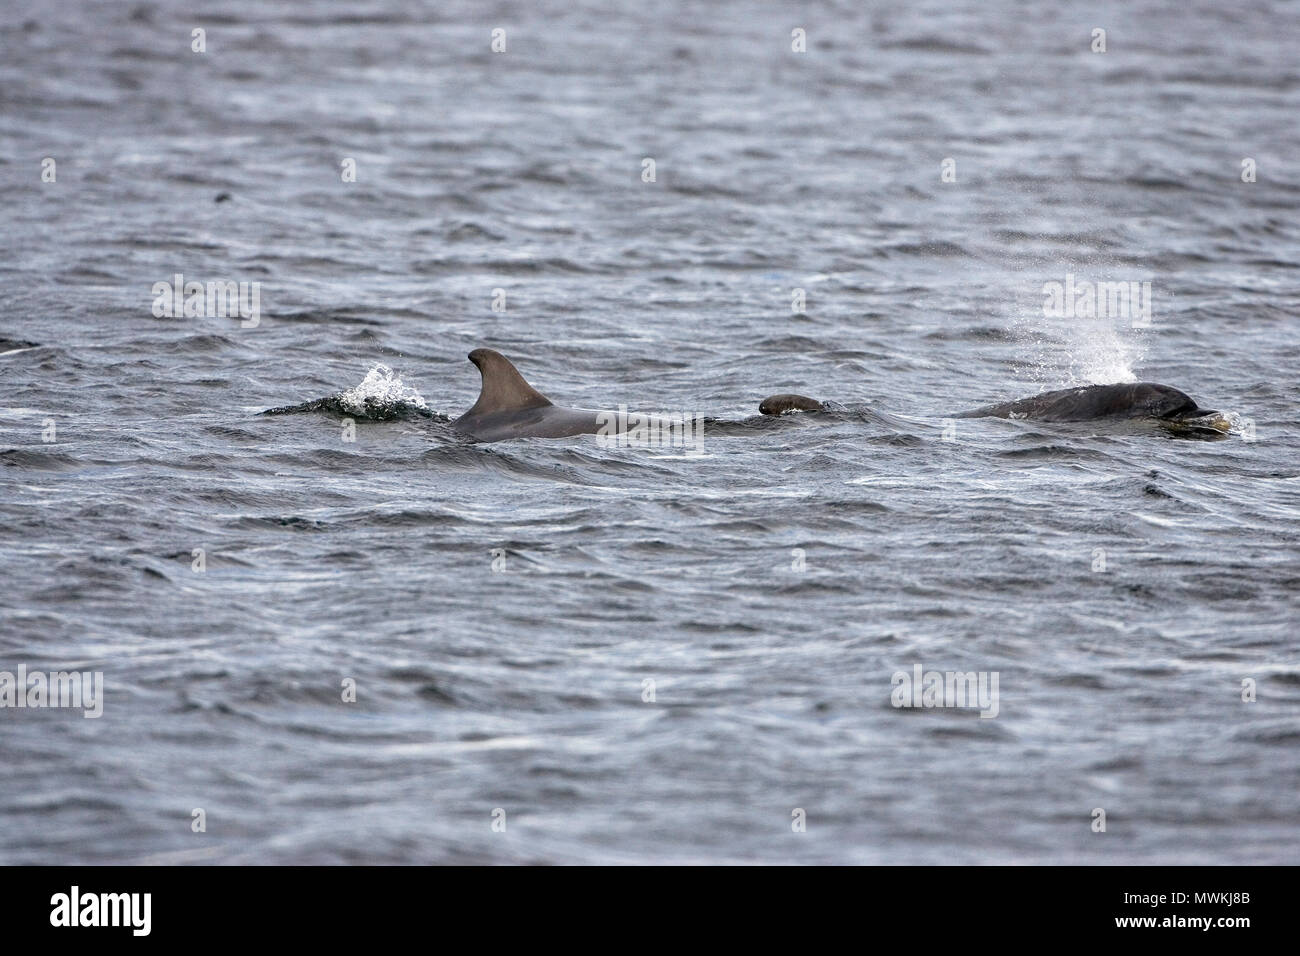 Bottlenose dolphin Tursiops truncatus swimming in the Moray Firth at Chanonry Point, The Black Isle, Ross and Cromarty, Highland Region, Scotland, UK, Stock Photo